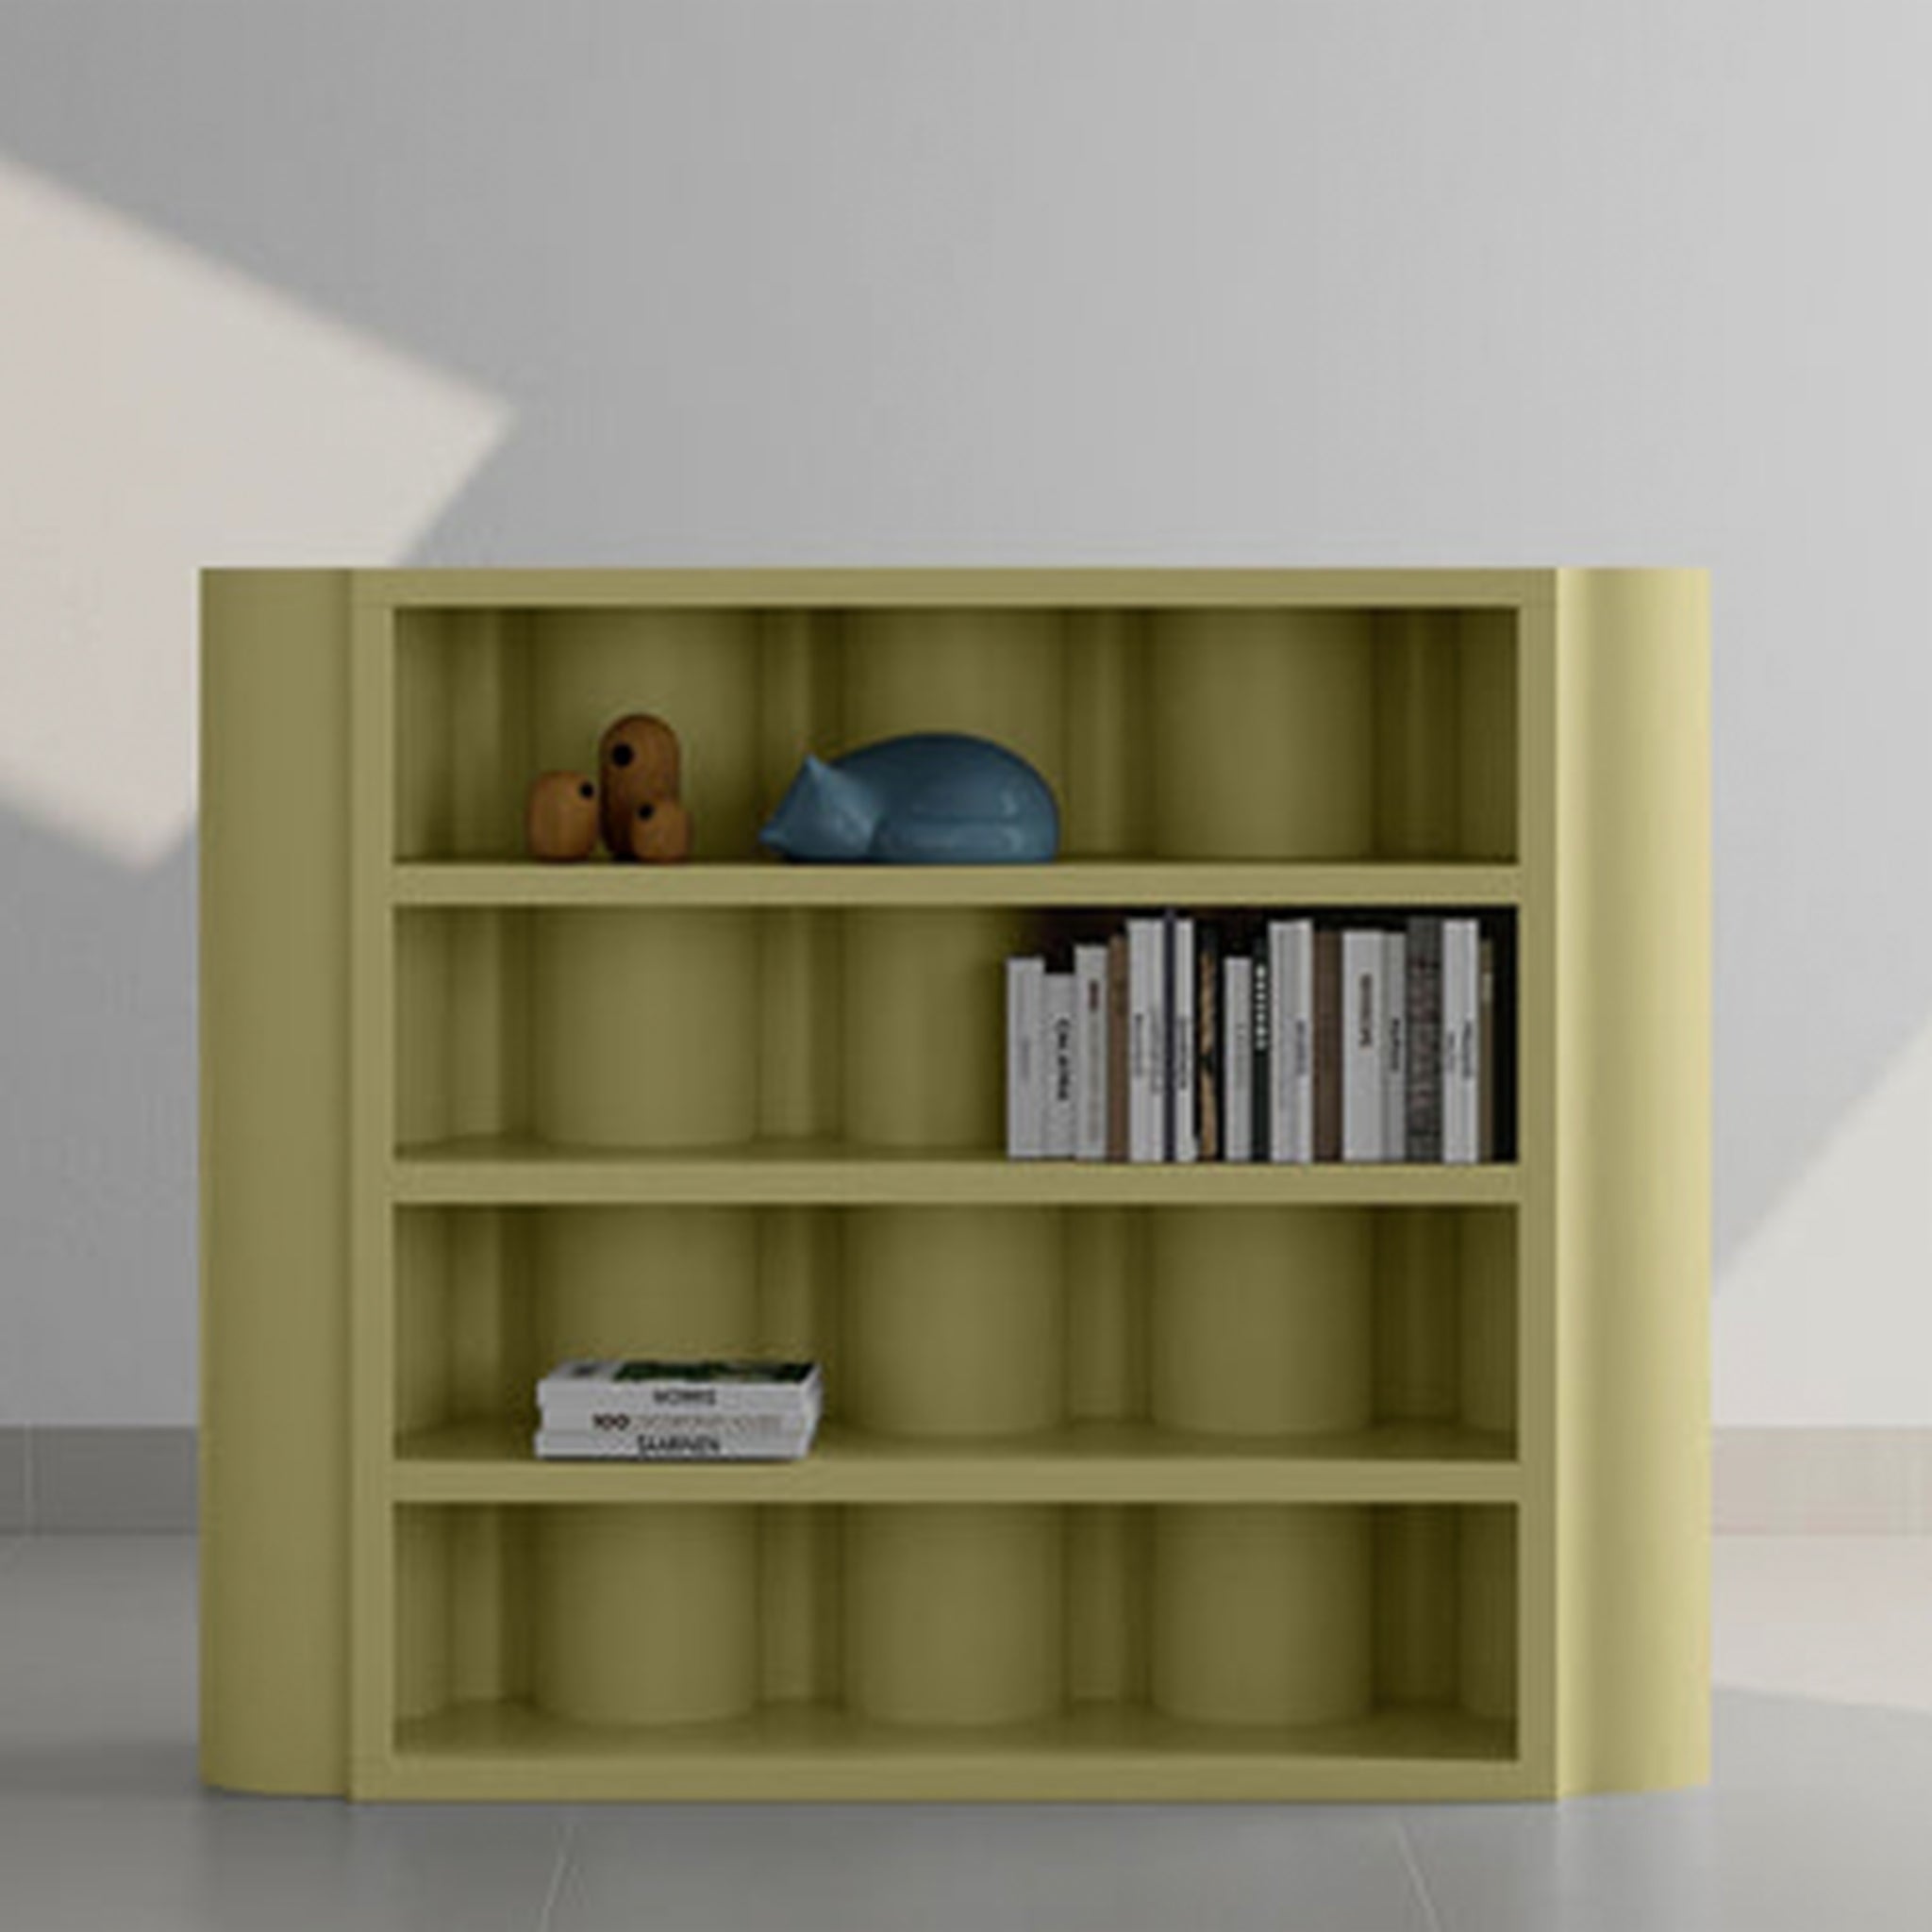 A stylish yellow bookcase with rounded edges, displaying a collection of books and decorative items on its shelves.